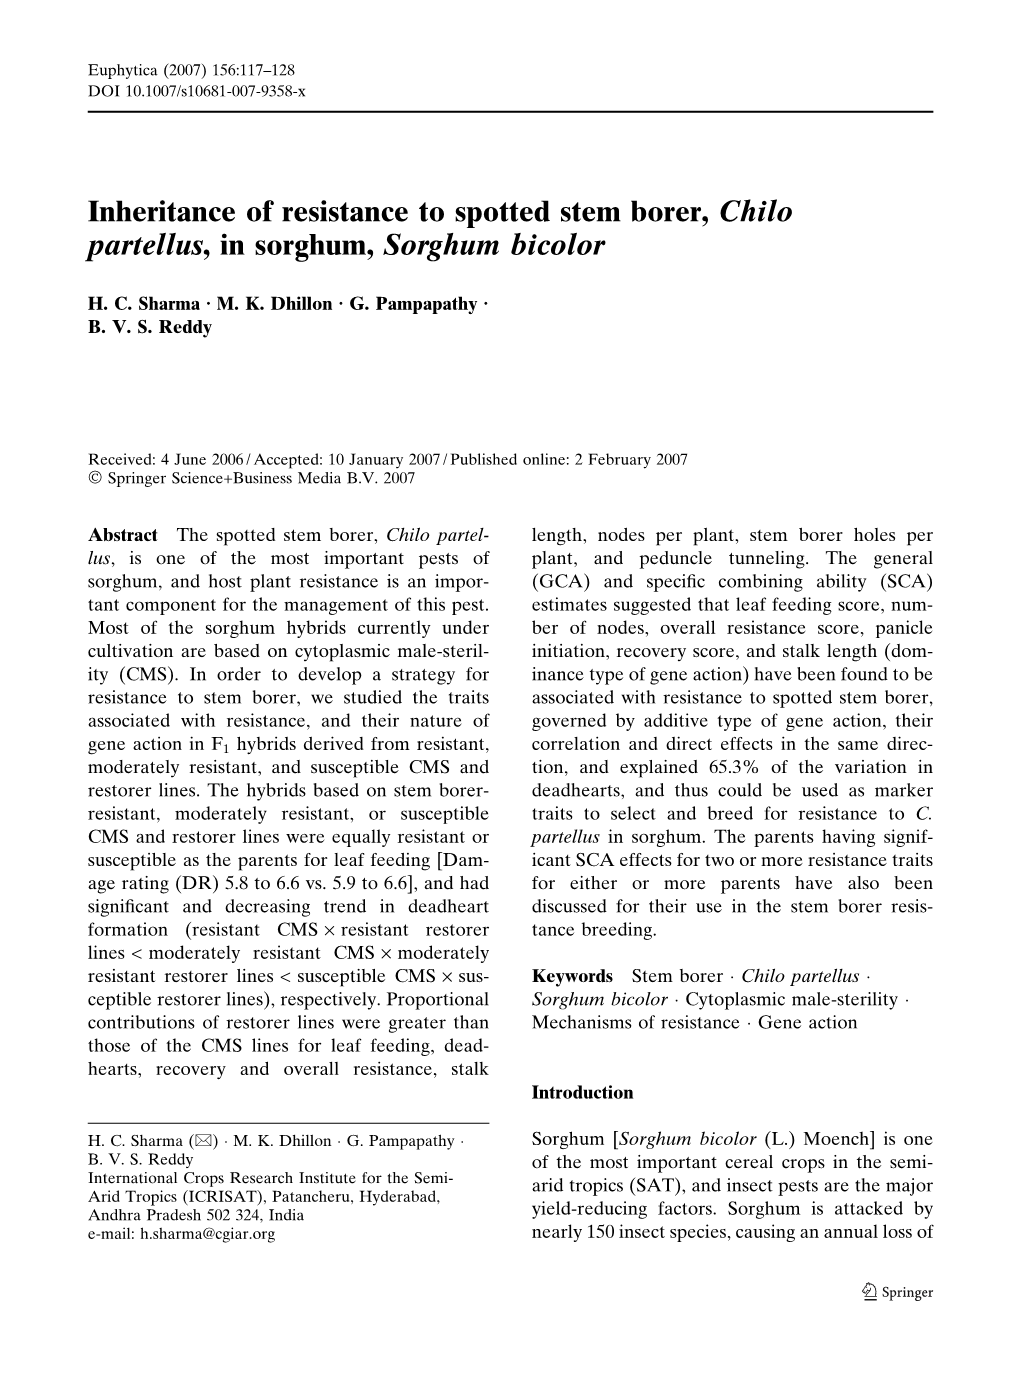 Inheritance of Resistance to Spotted Stem Borer, Chilo Partellus, in Sorghum, Sorghum Bicolor